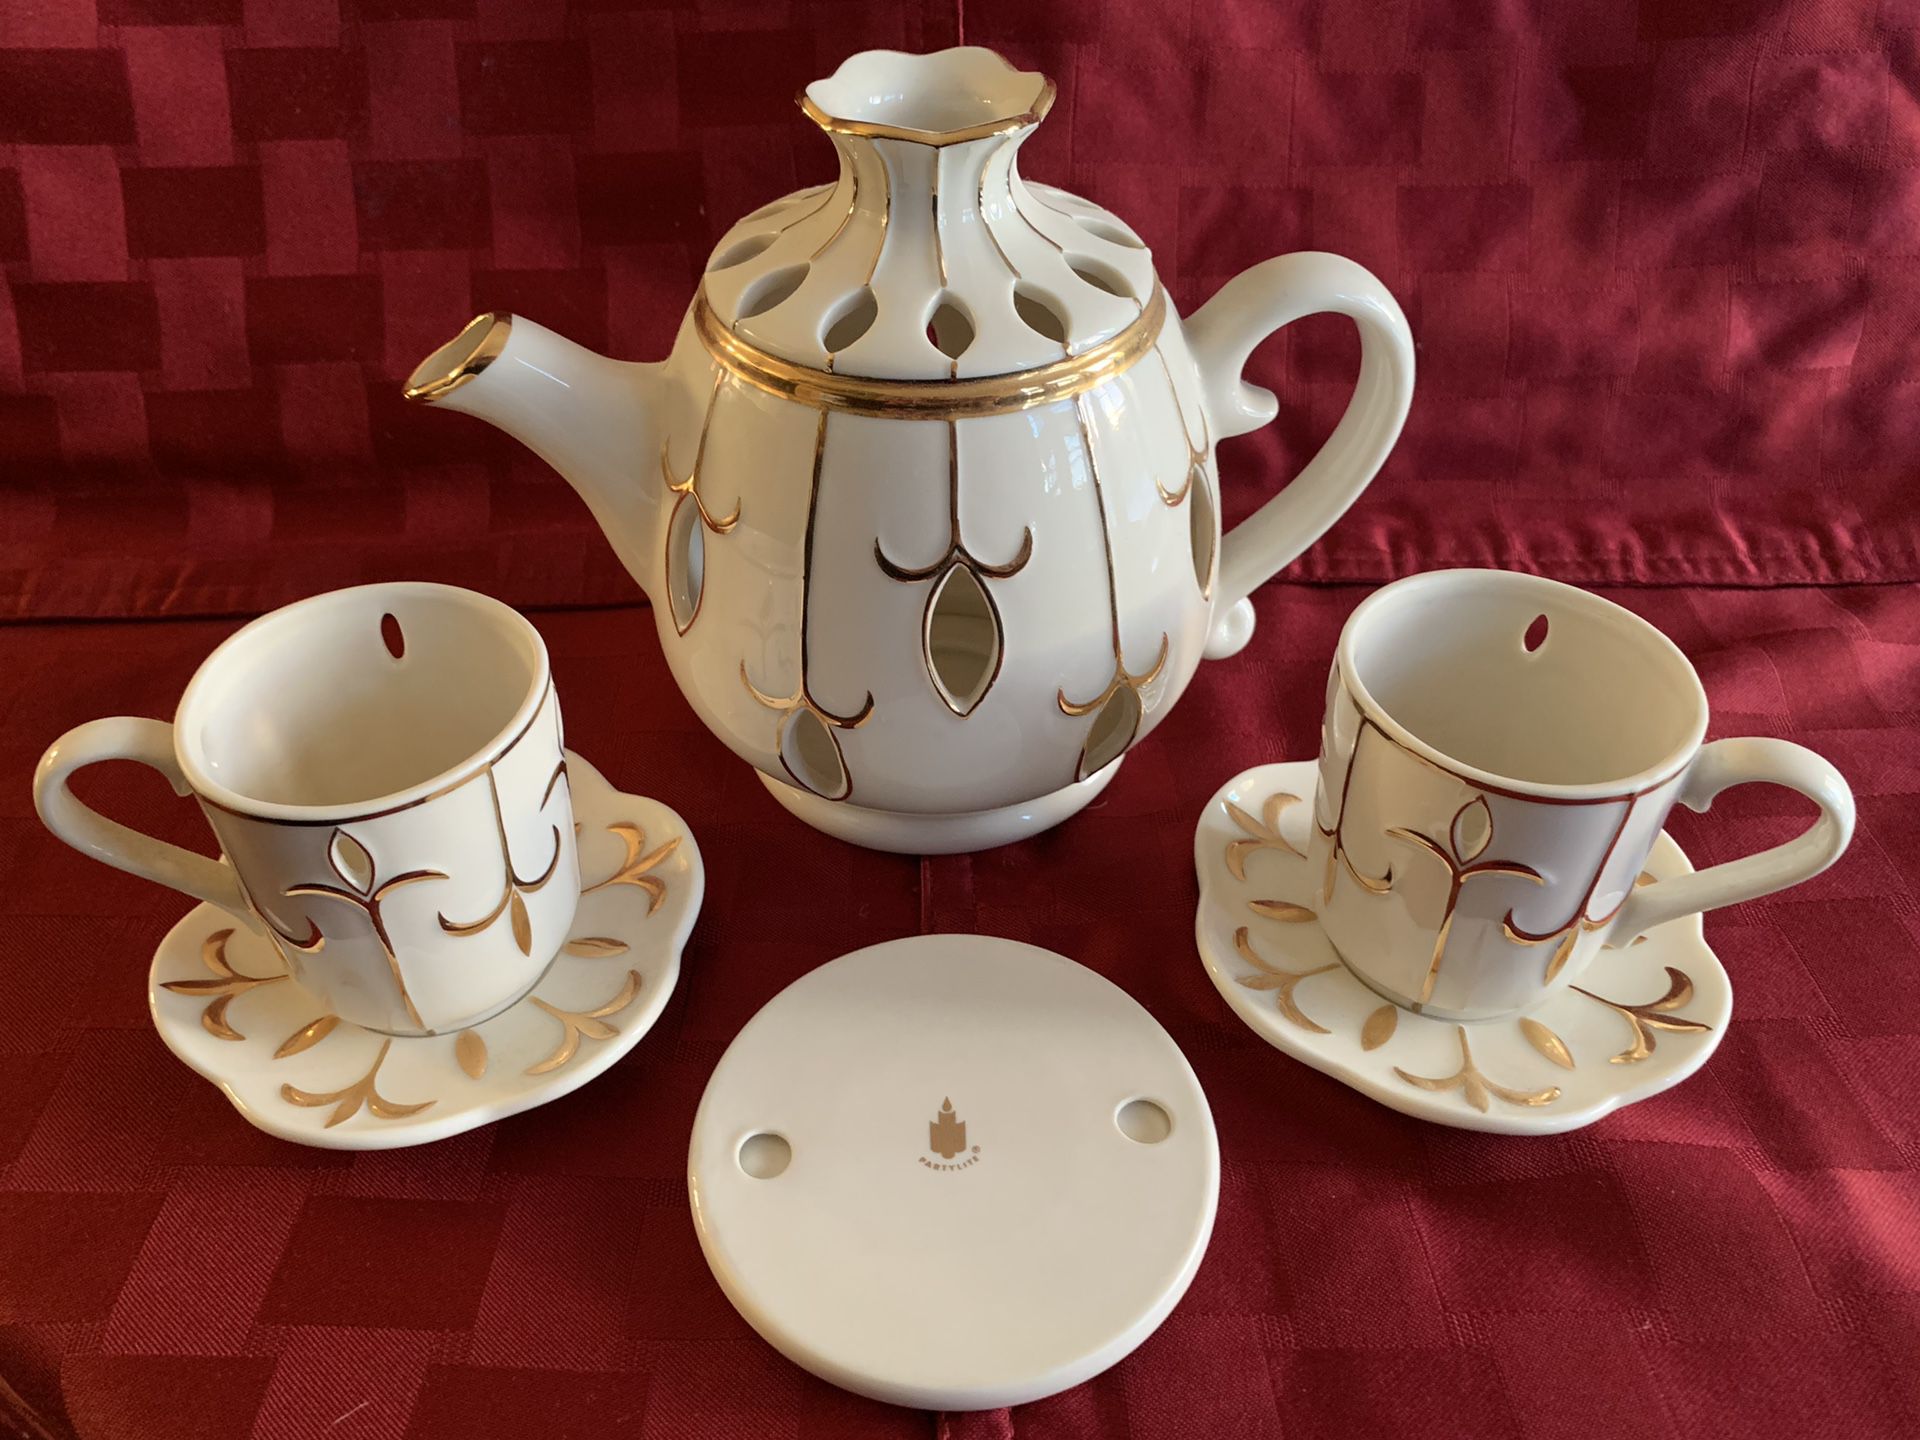 Partylite Ivory Gold Teapot with Espresso Tea Cup and Saucer Votive Candle Holder 6pc set